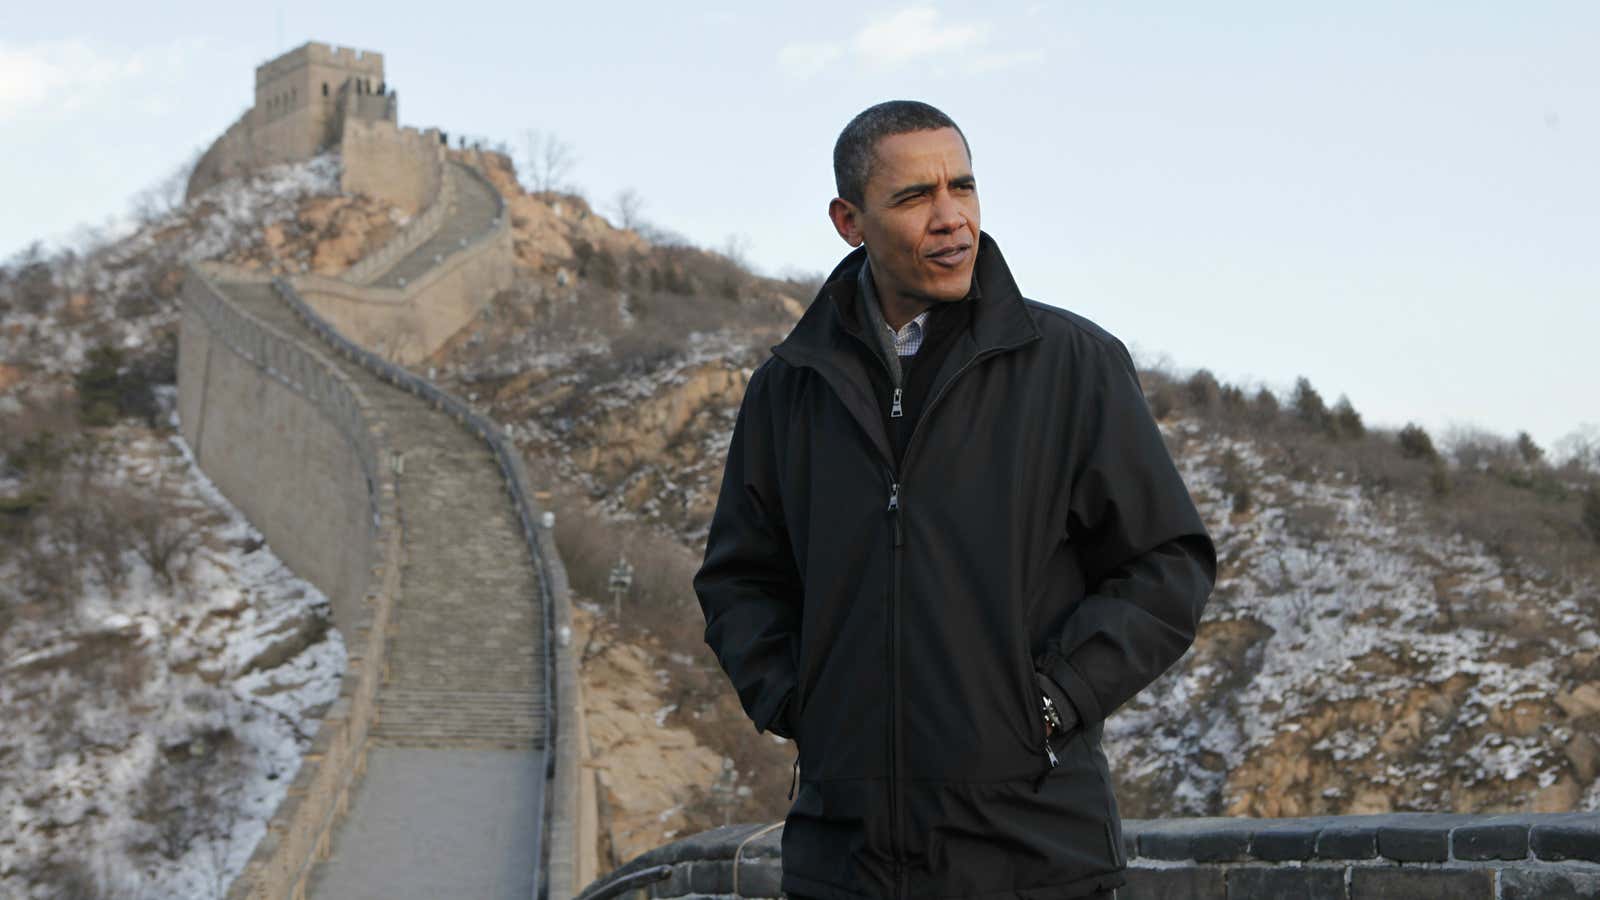 President Obama on the other Great Wall.